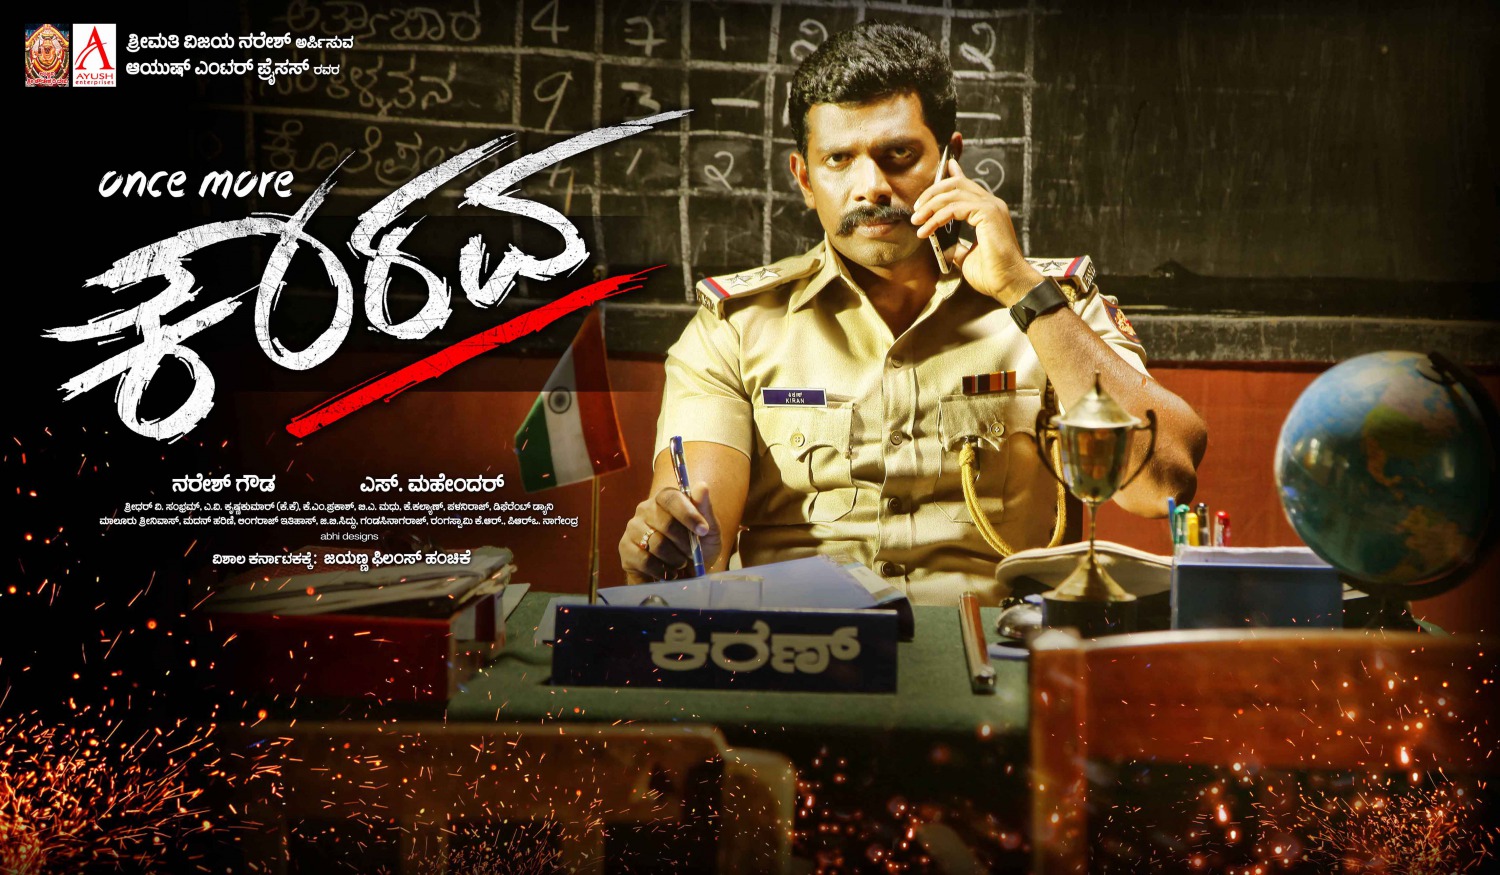 Extra Large Movie Poster Image for Once More Kaurava (#15 of 20)